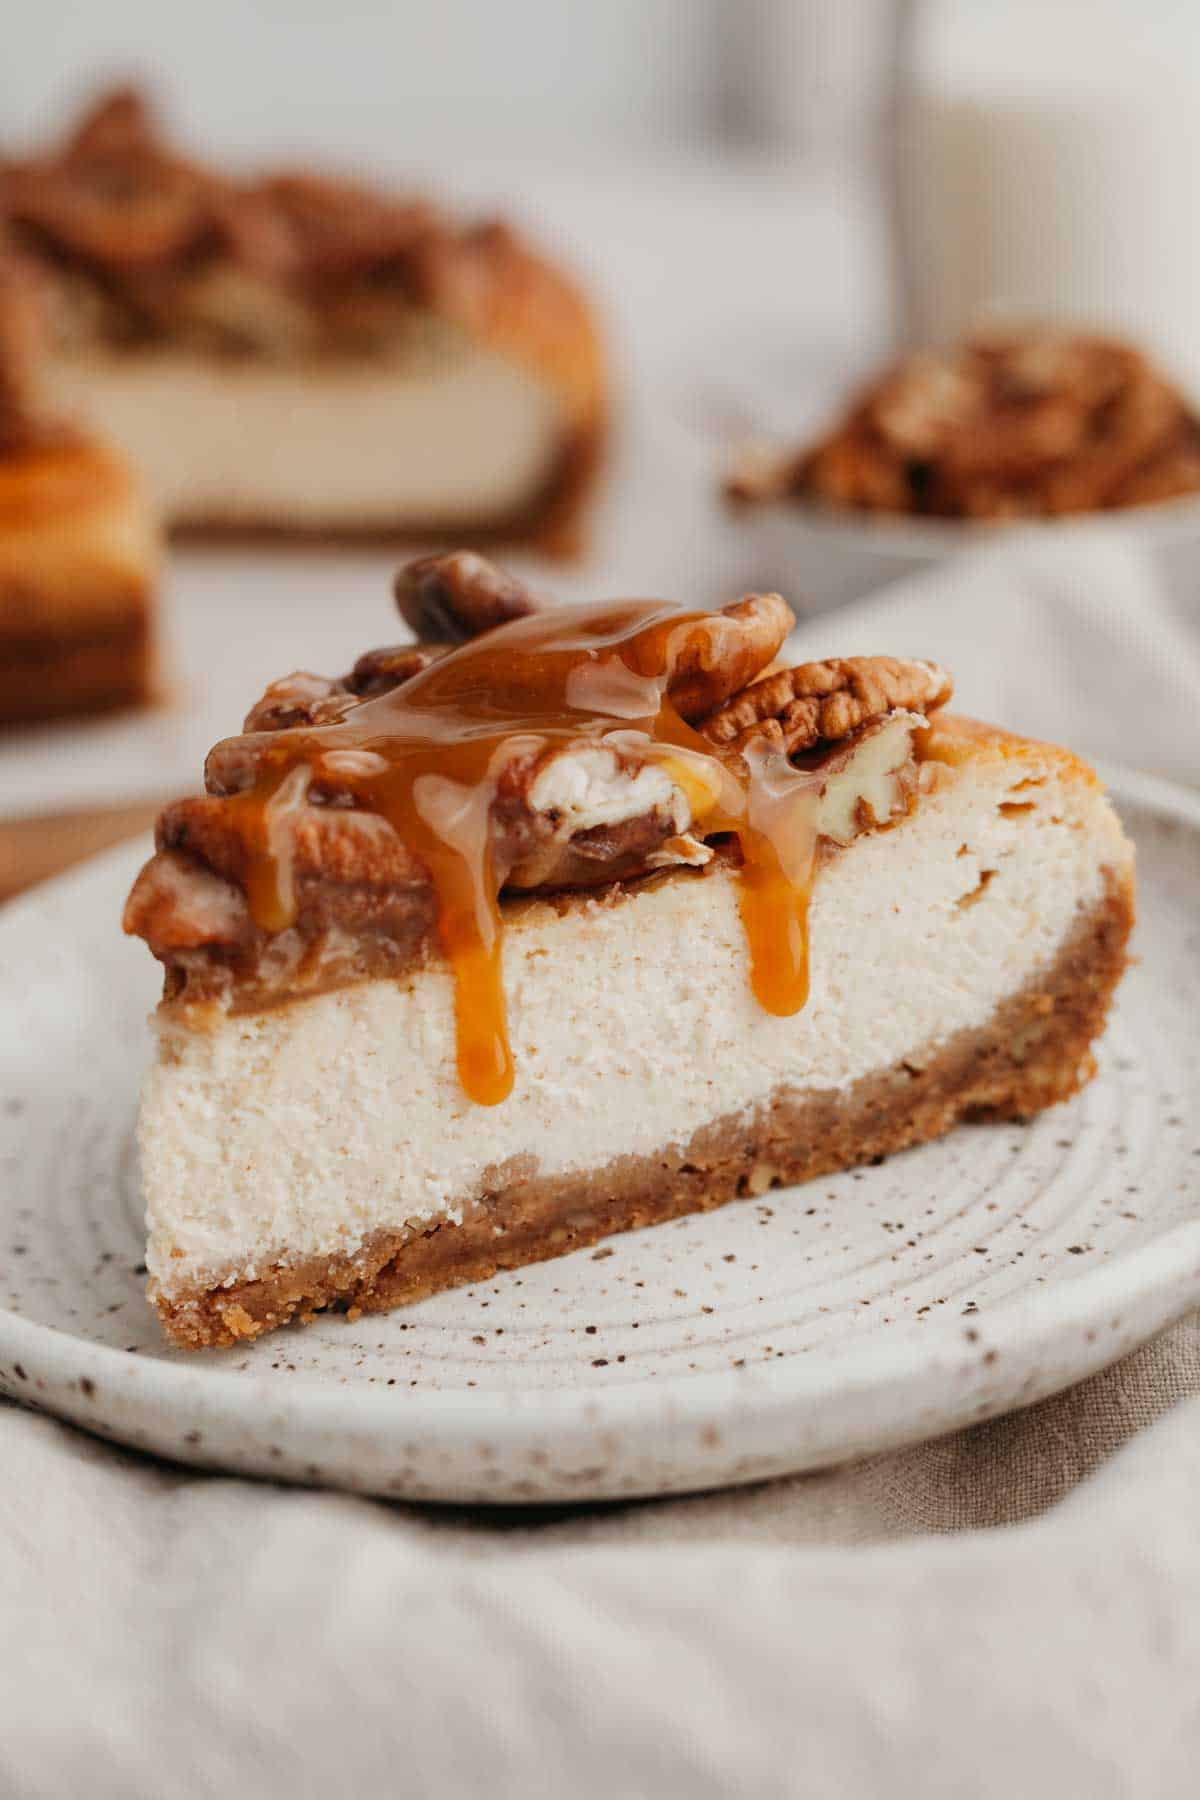 A slice of pecan cheesecake on a plate.